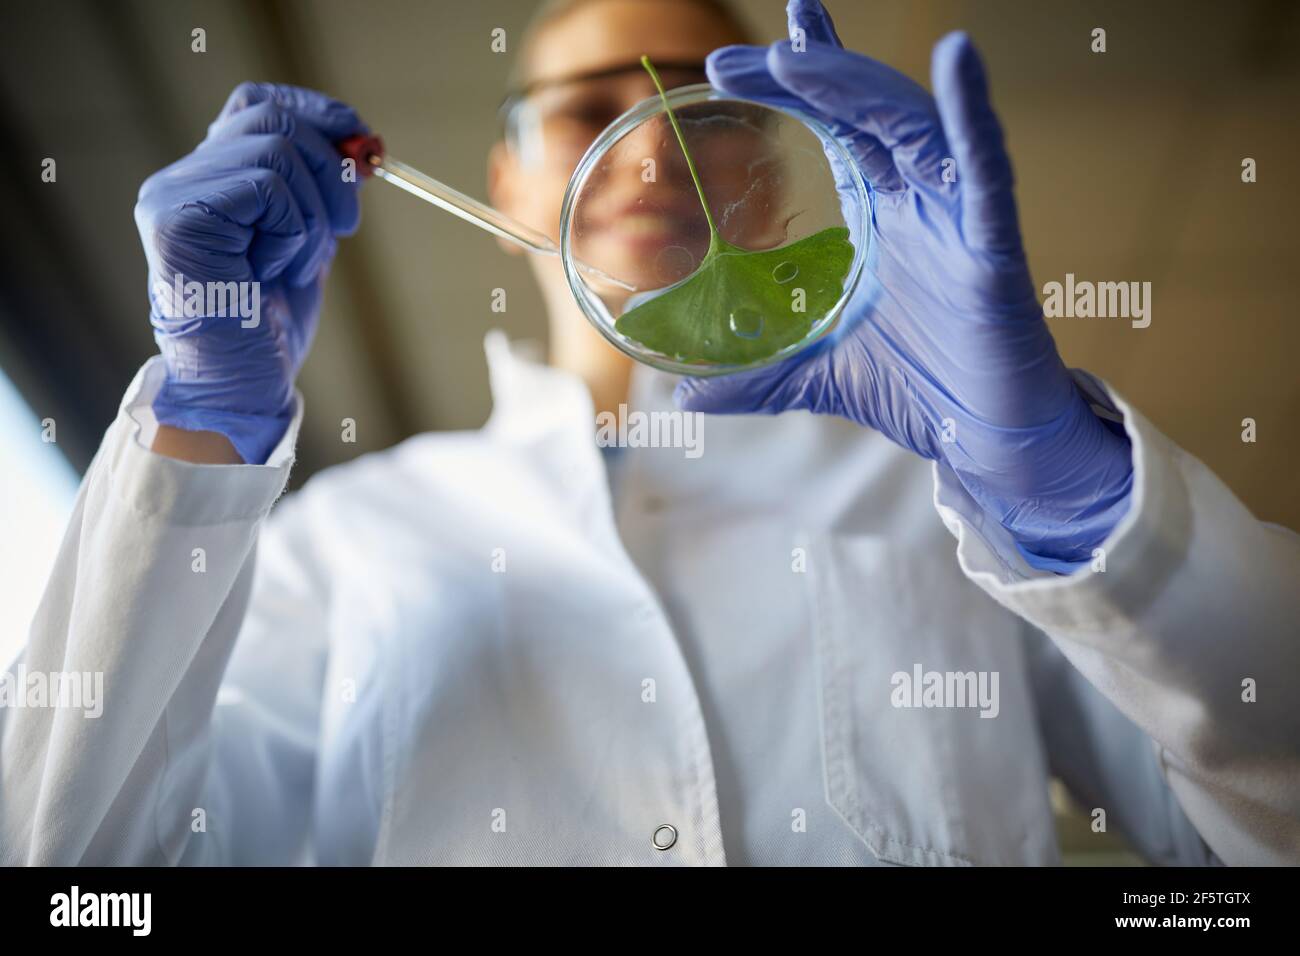 A young female scientist holds a green leaf sample ready for analysis in a working atmosphere at the university laboratory. Science, chemistry, lab, p Stock Photo